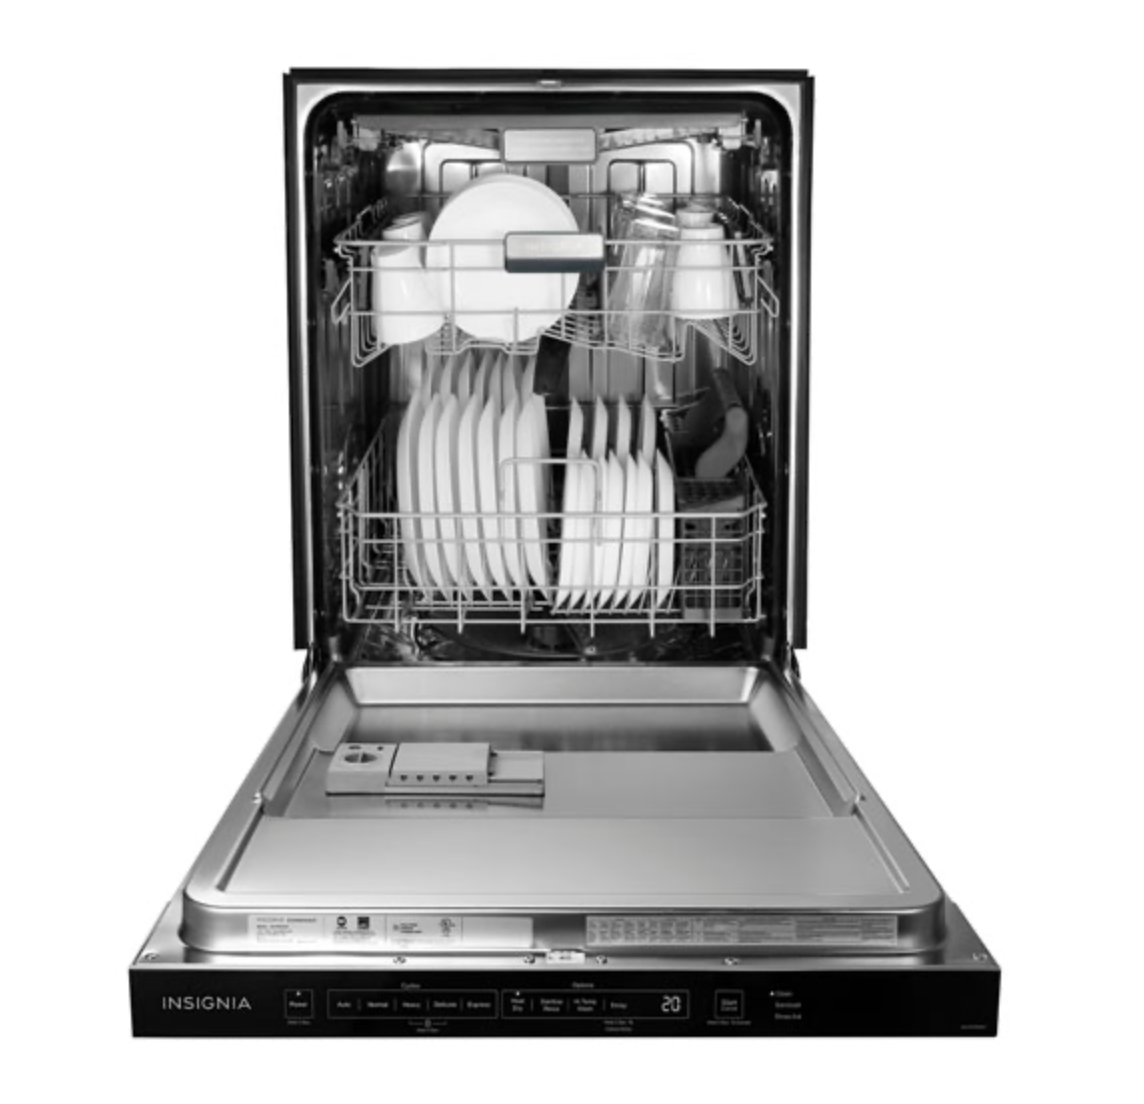 Insignia 24-inch dishwasher front view open with dishes.